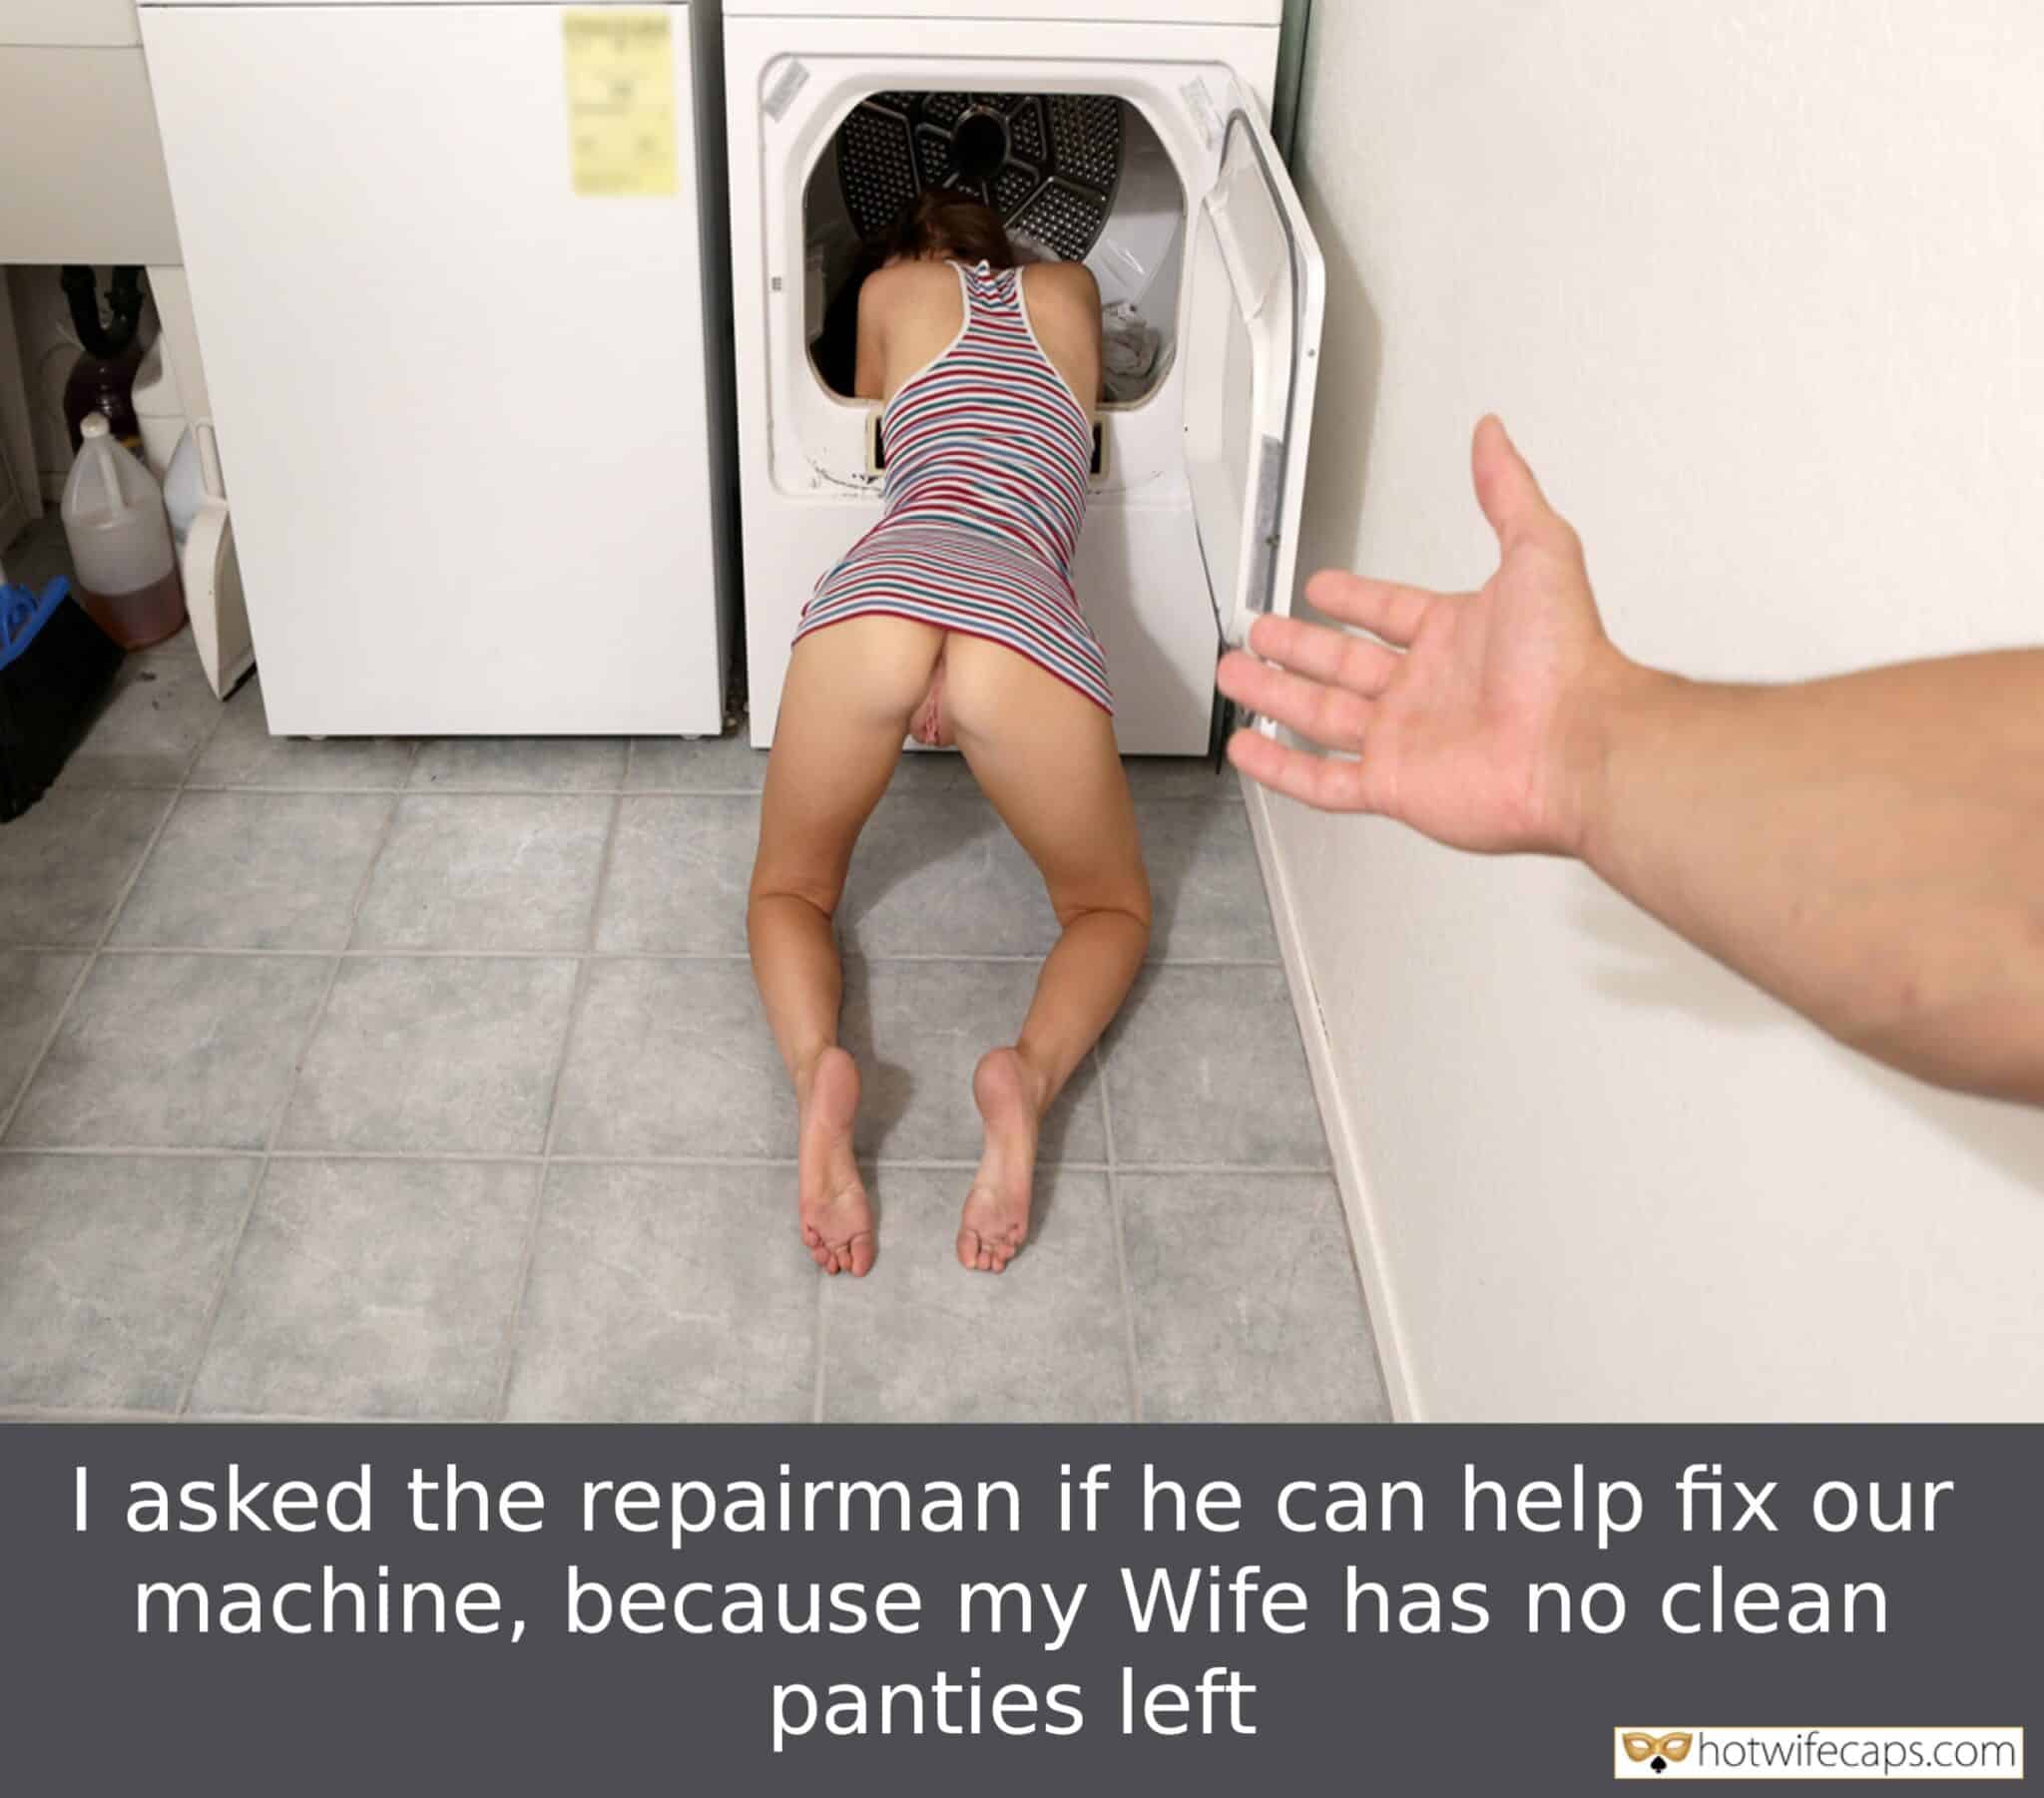 Wife Sharing No Panties Flashing Bottomless  hotwife caption: I asked the repairman if he can help fix our machine, because my Wife has no clean panties left Offering Wife’s Bare Asspussy to Repair Man